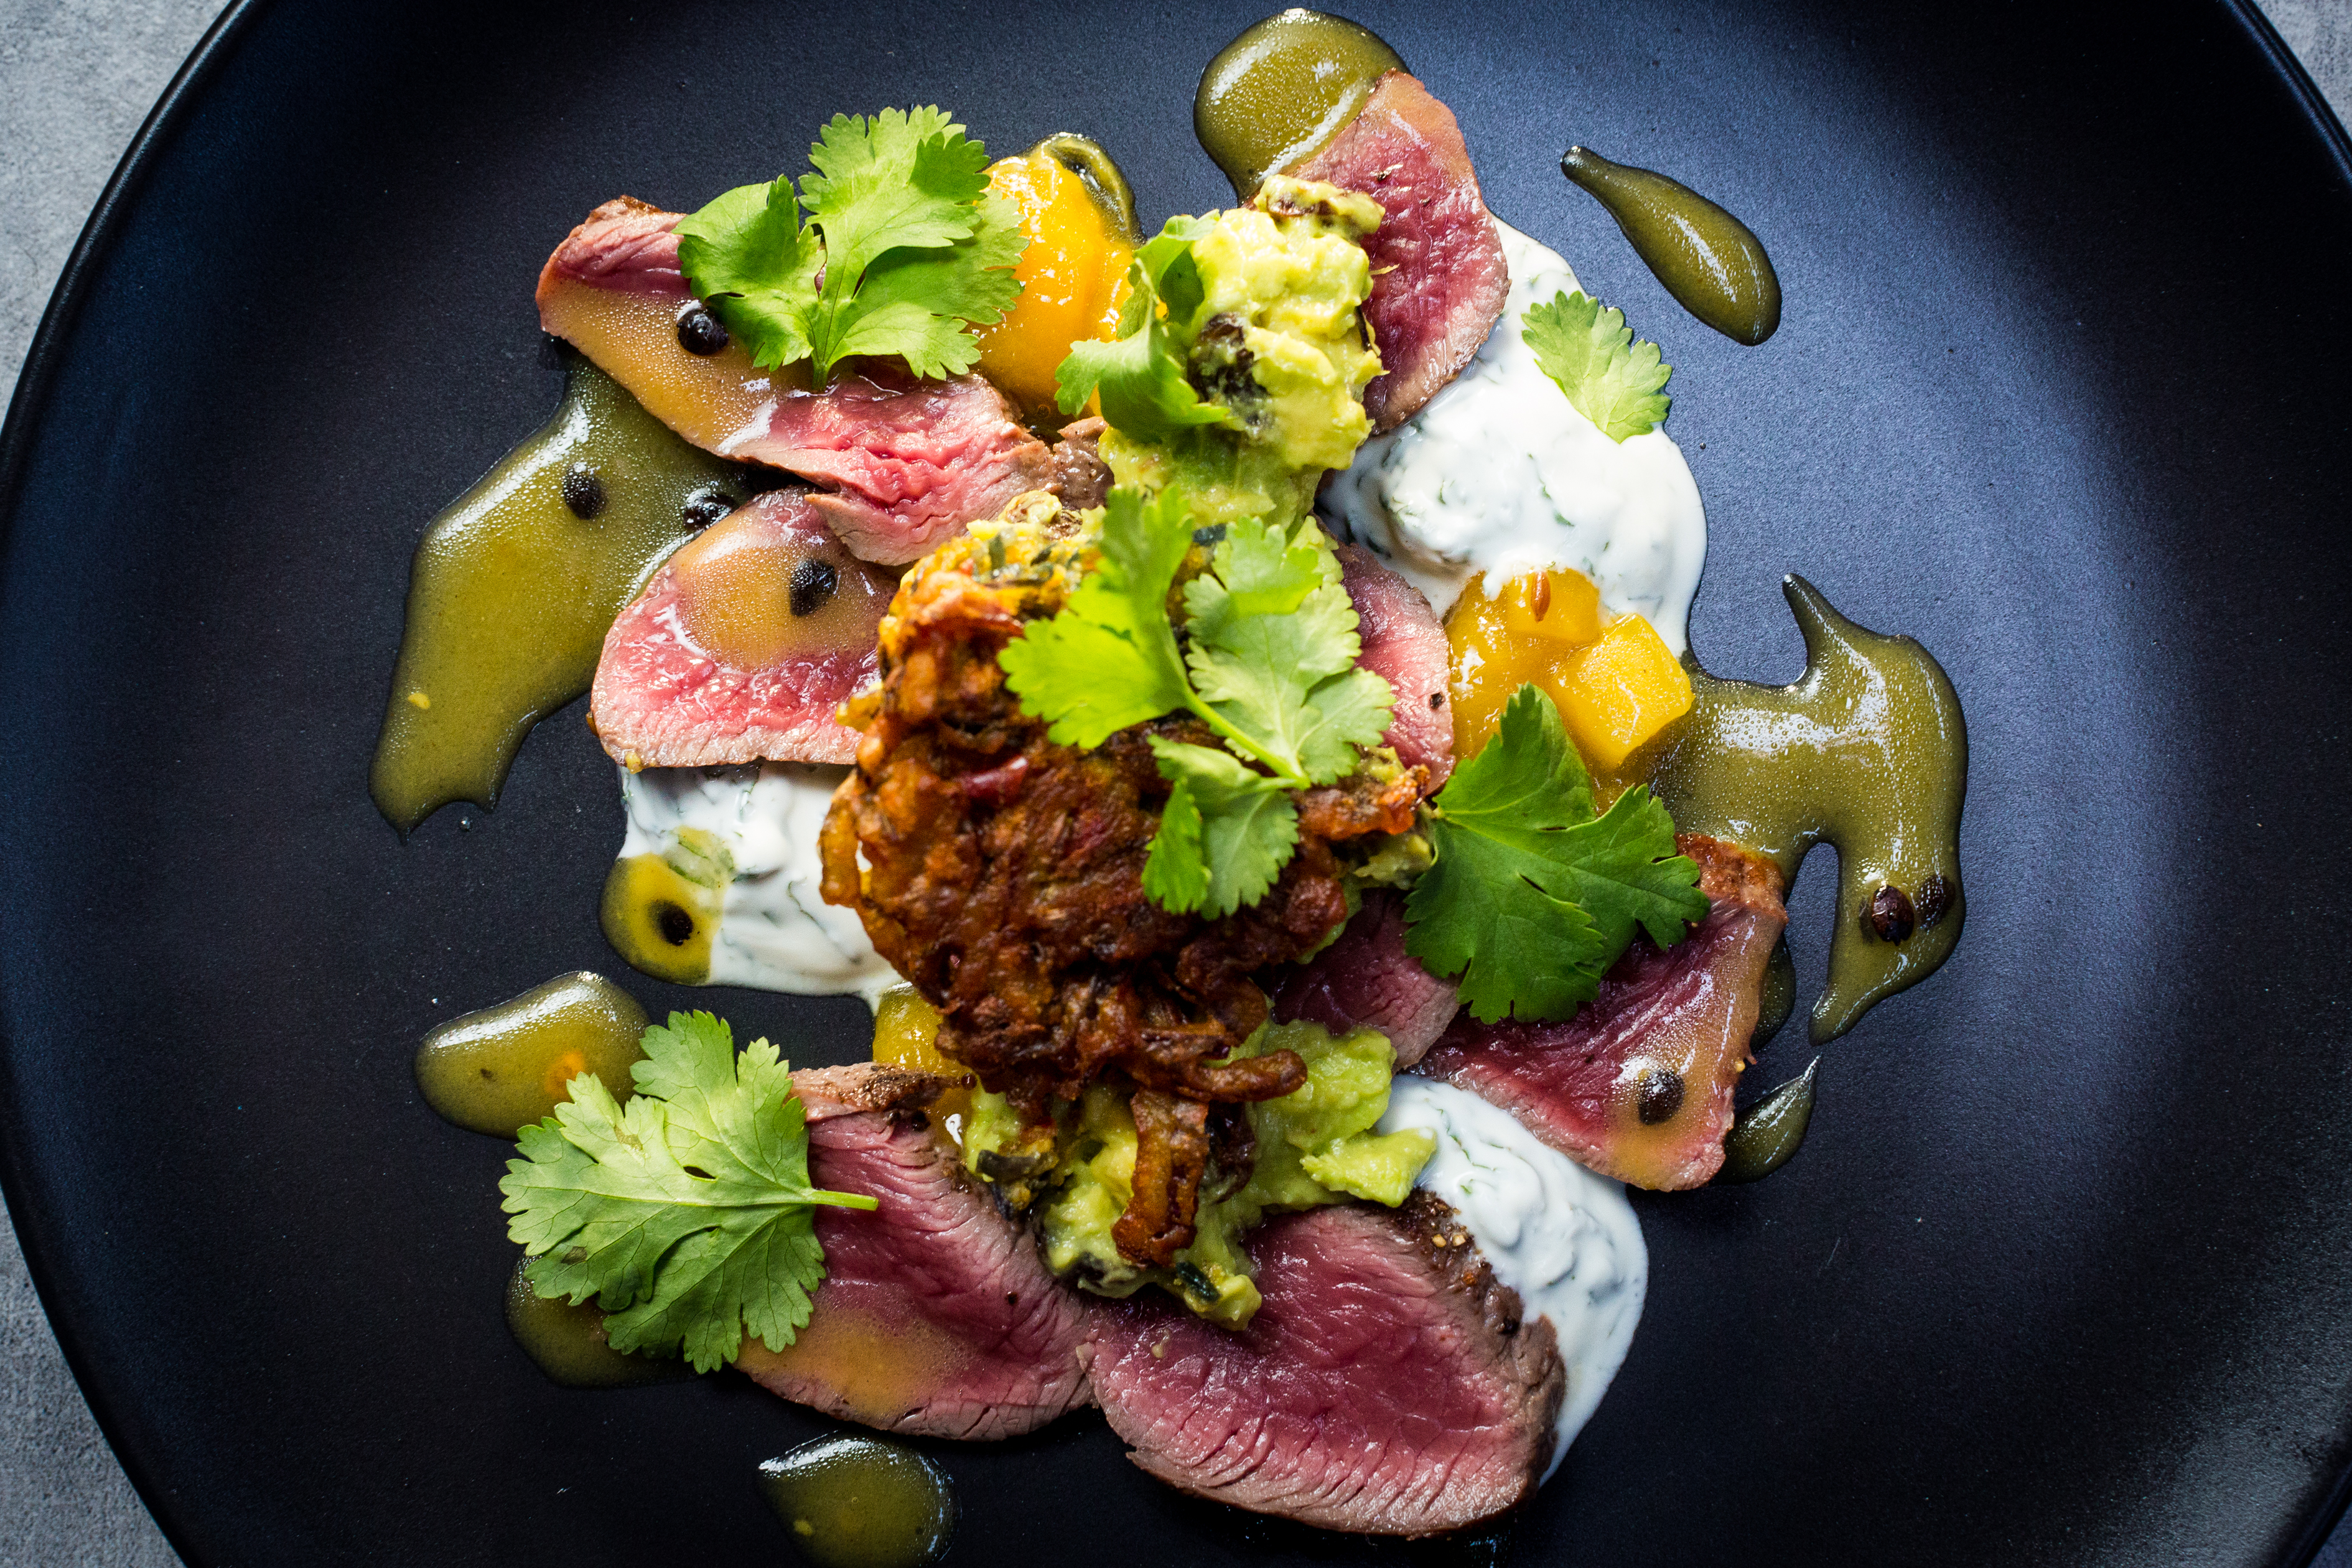 Seared Indian flavoured Venison by Neil Brazier